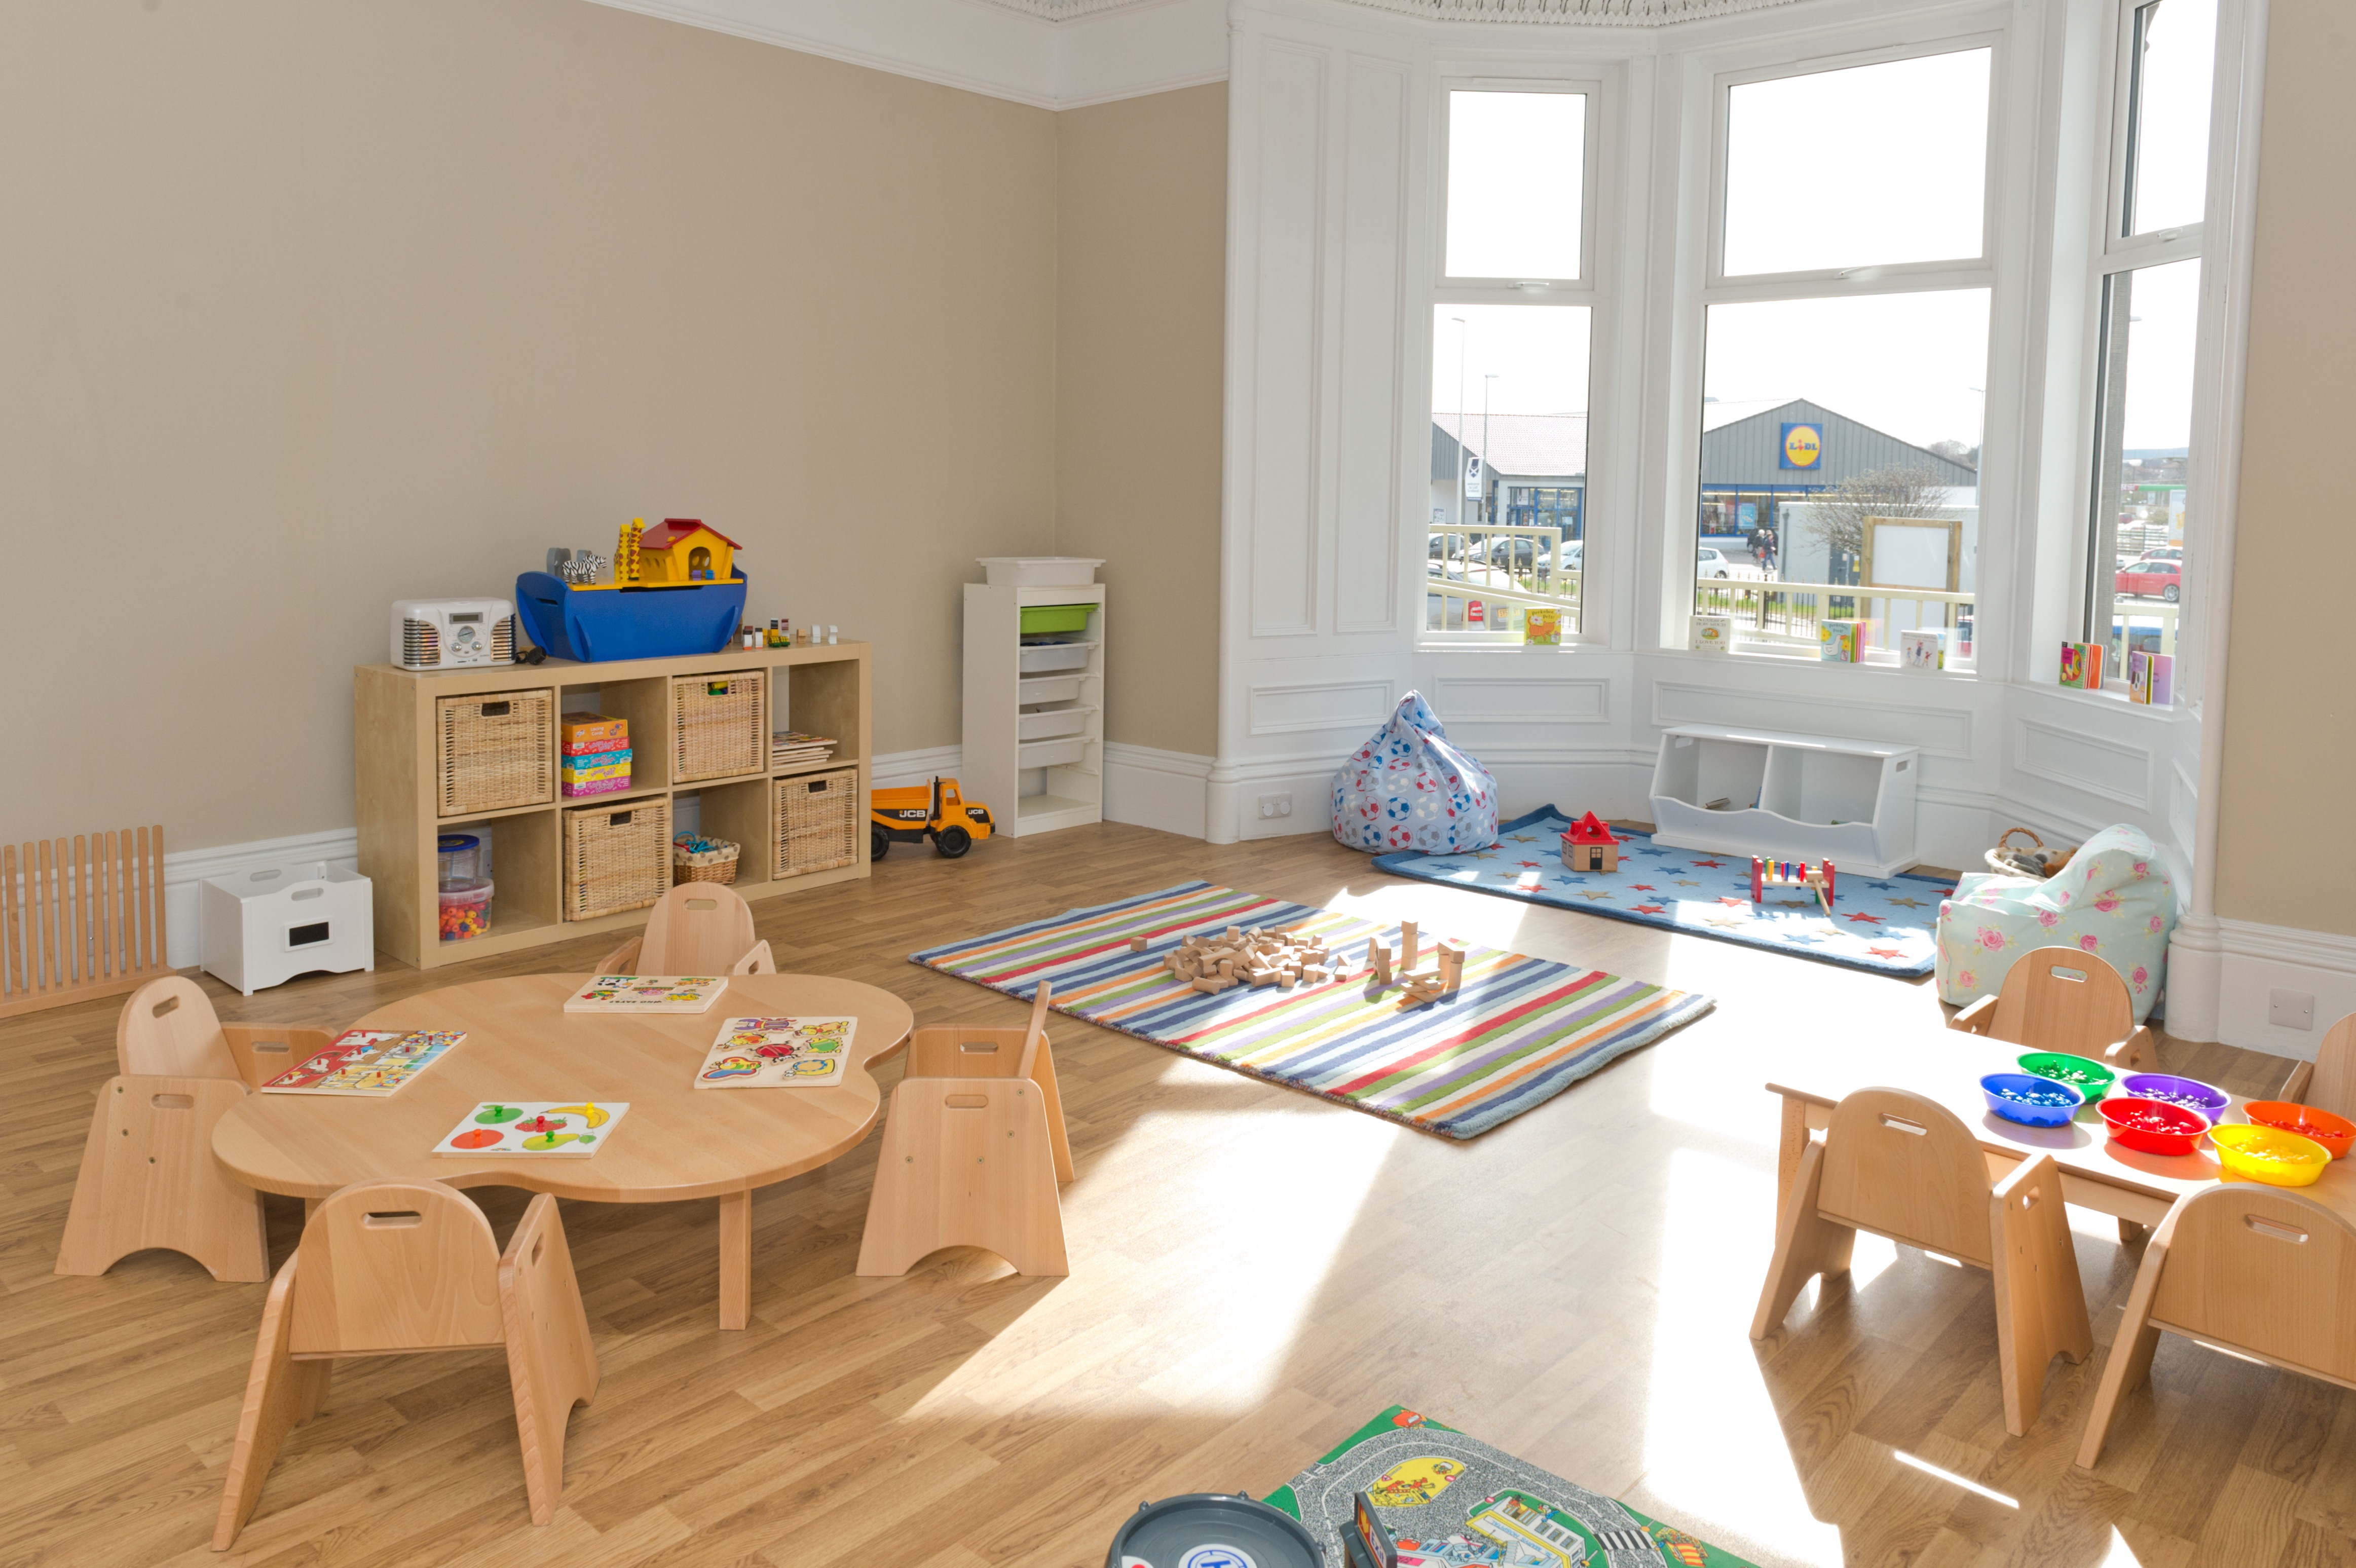 Toddler room - age 2-3 years